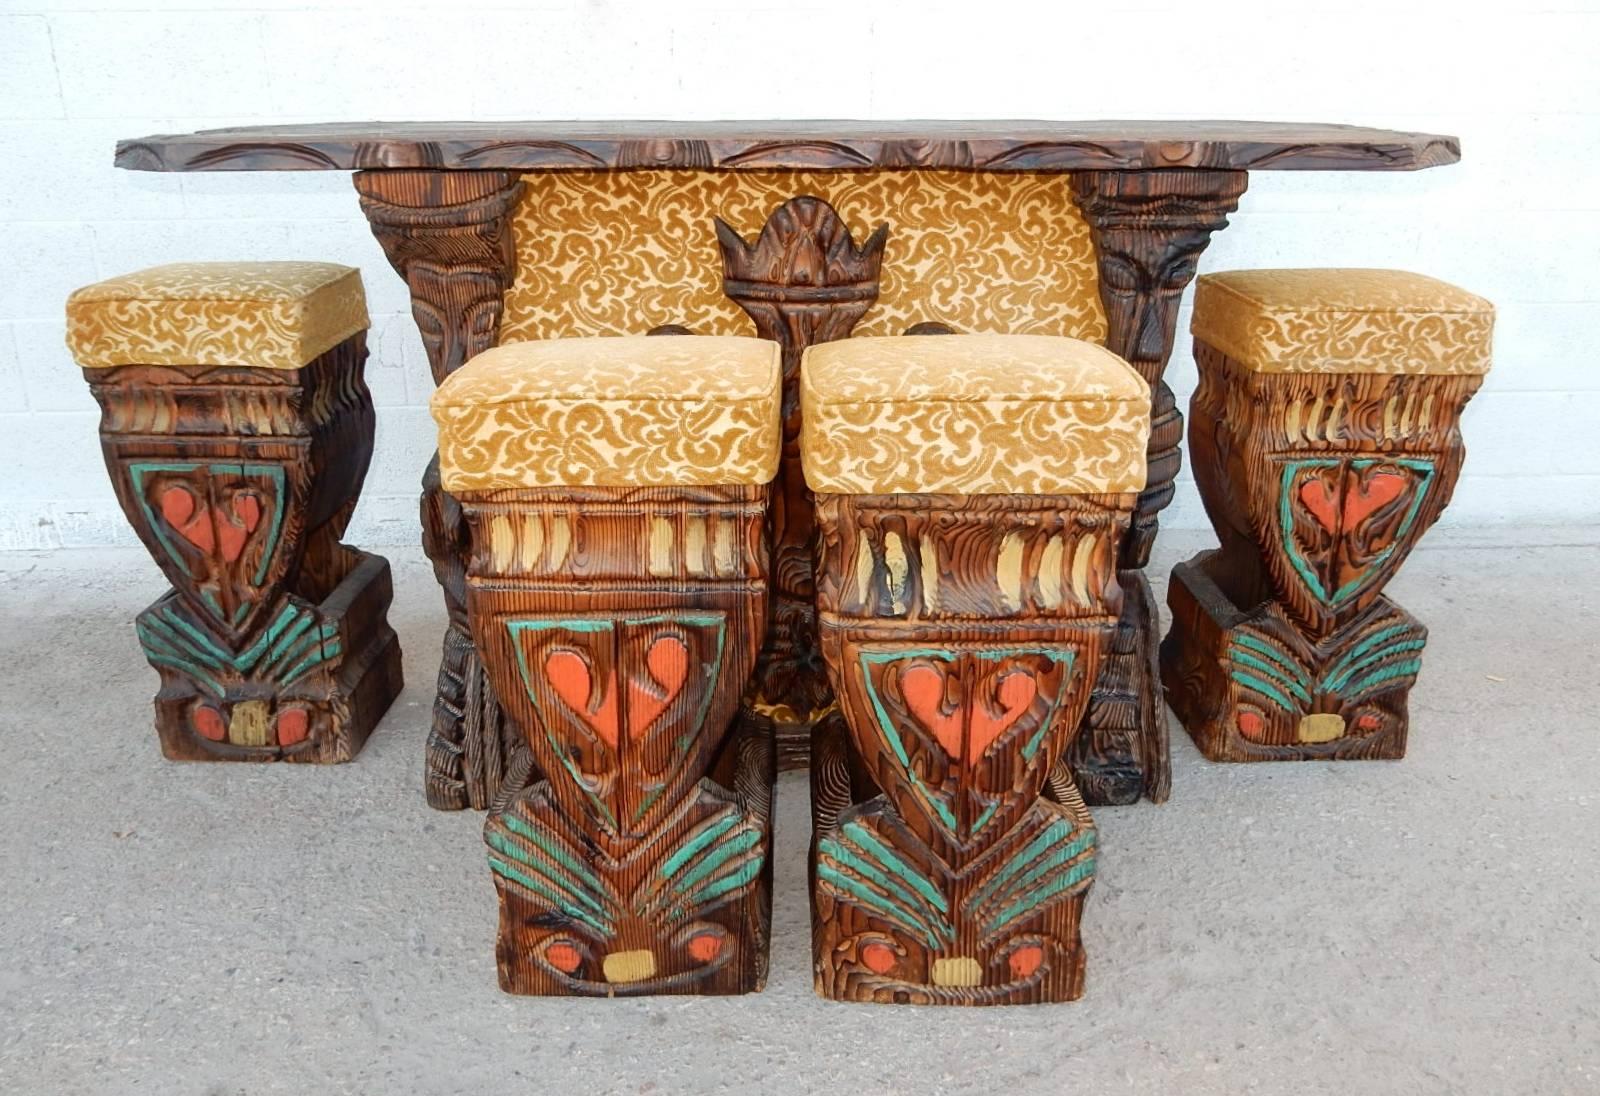 Hand-sculpted swamp cedar dry bar with four polychrome stools by William Westenhaver or Witco, circa 1960s.
Flocked velvet upholstery on stools and face of bar. Male and female figures on each side of front with armour shield in centre.
The front